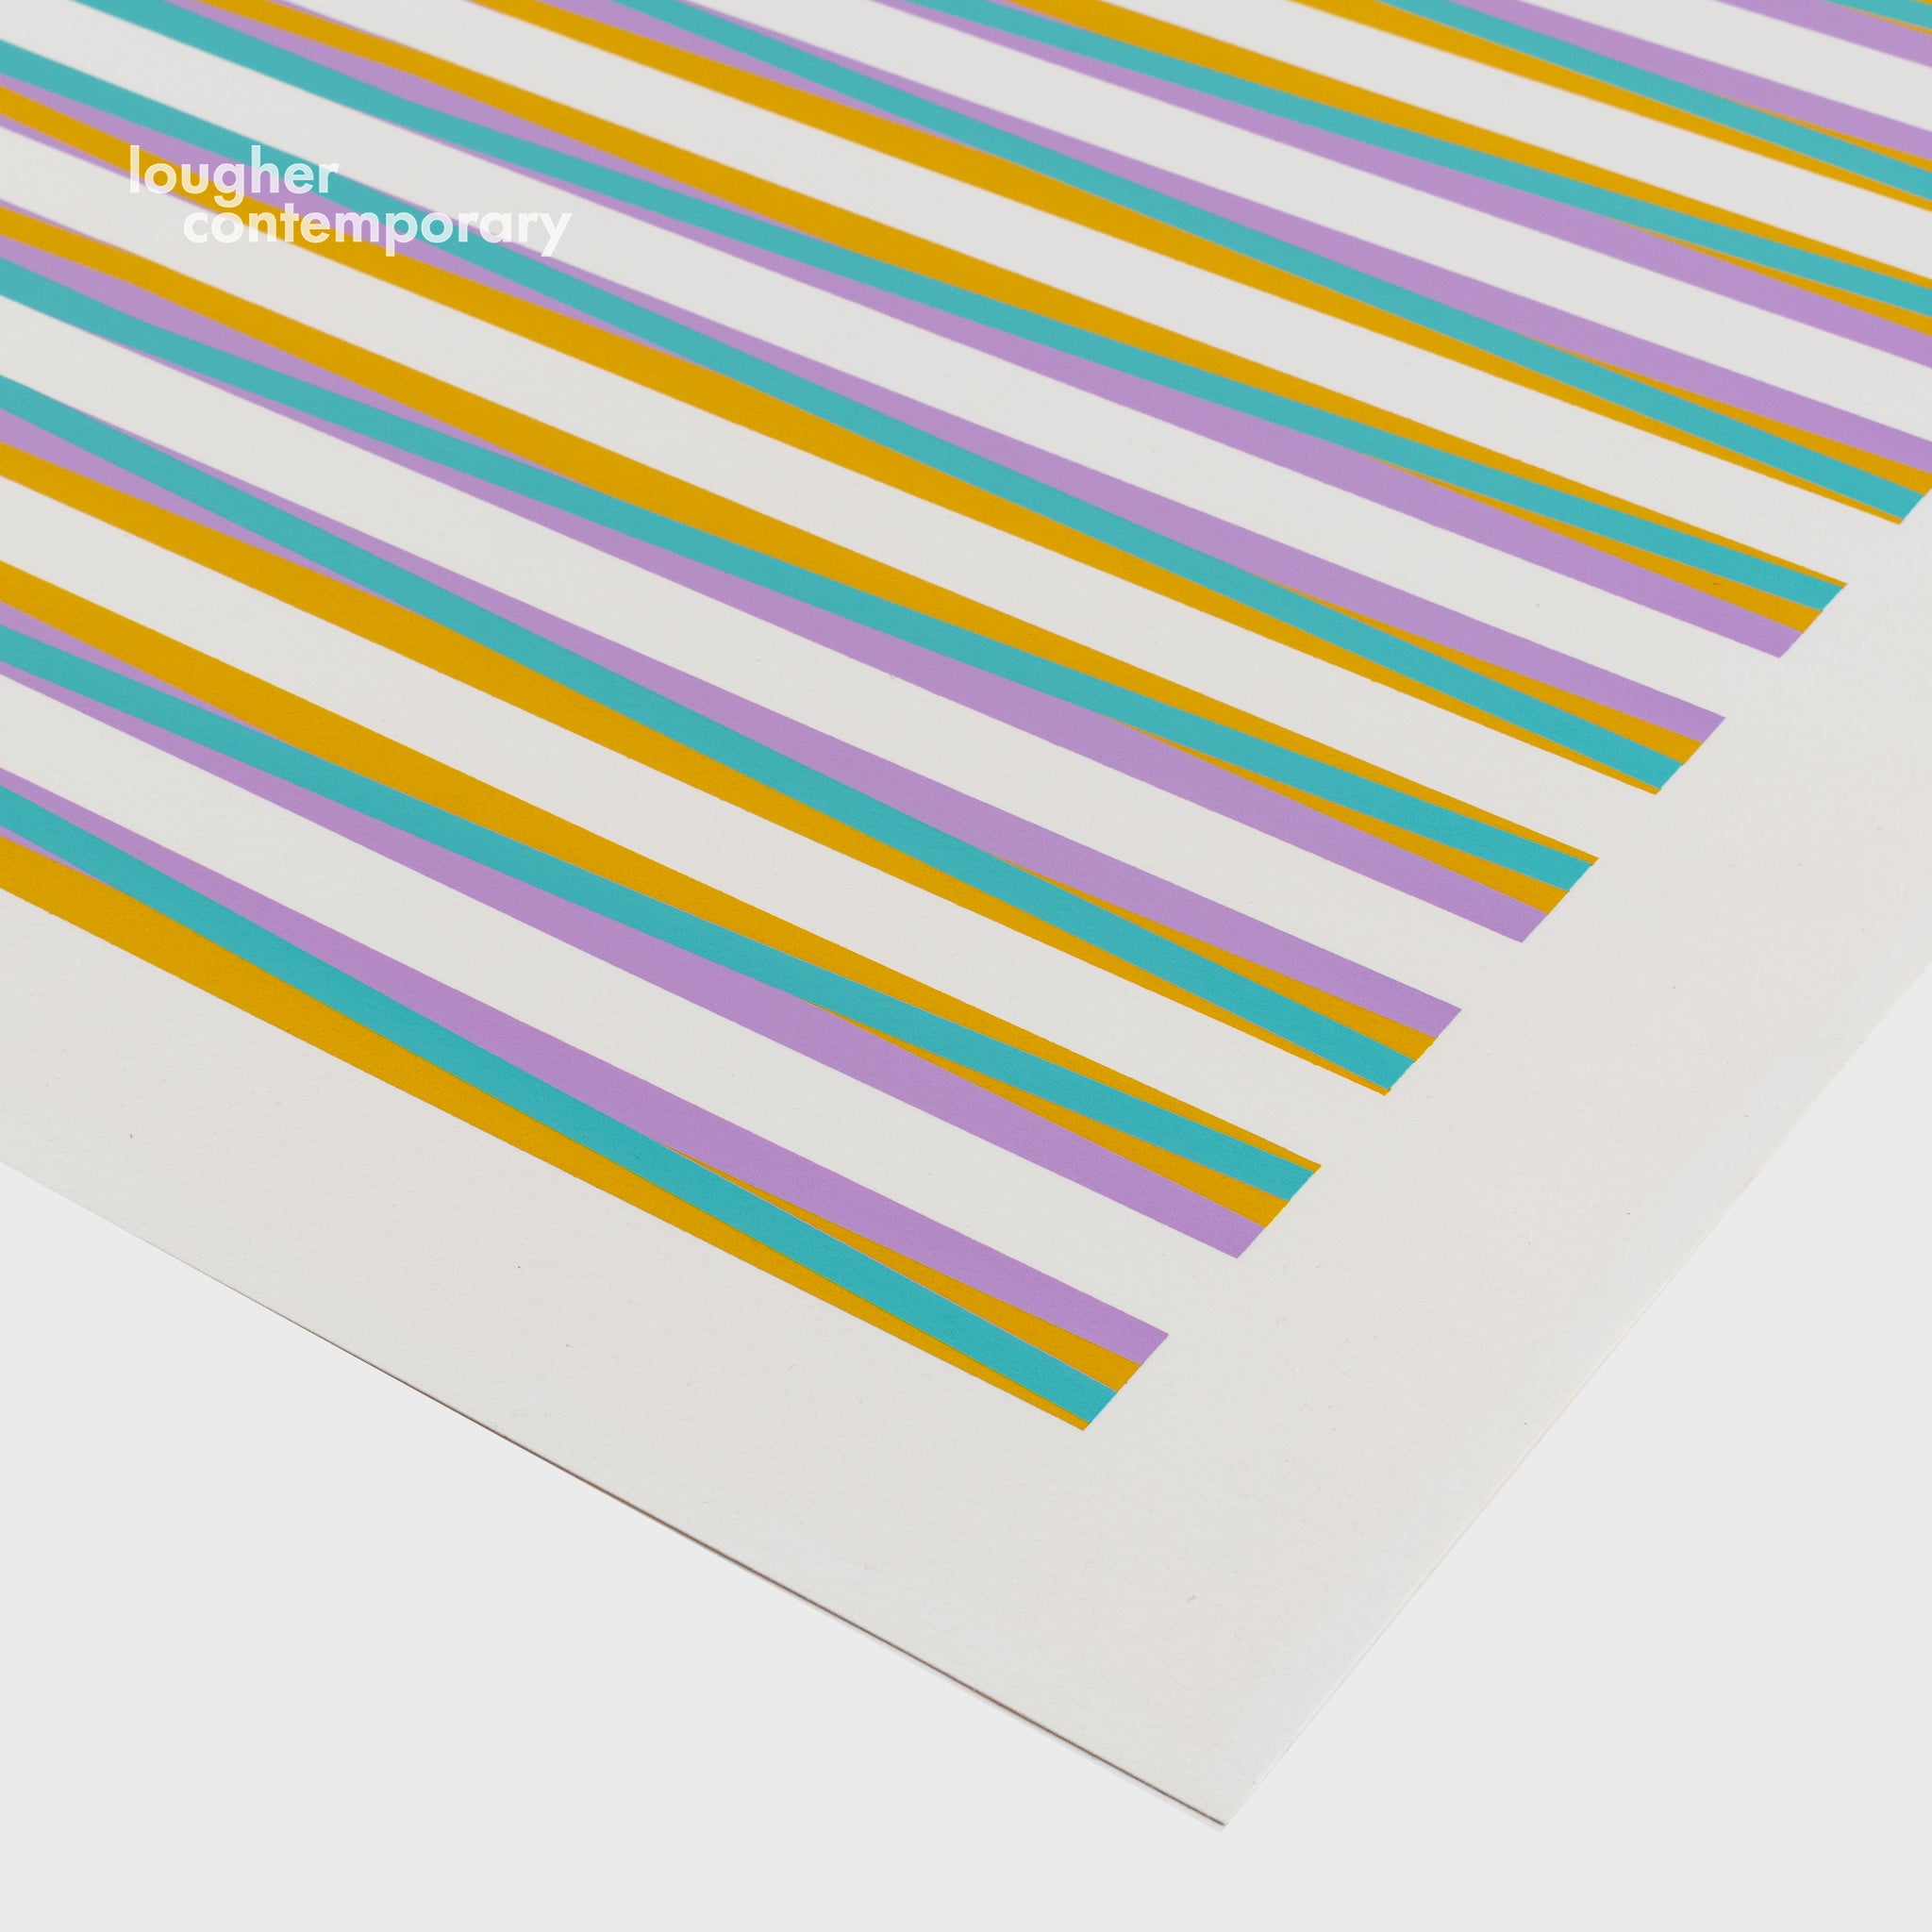 Bridget Riley, Print for Chicago 8, 1971 For Sale - Lougher Contemporary